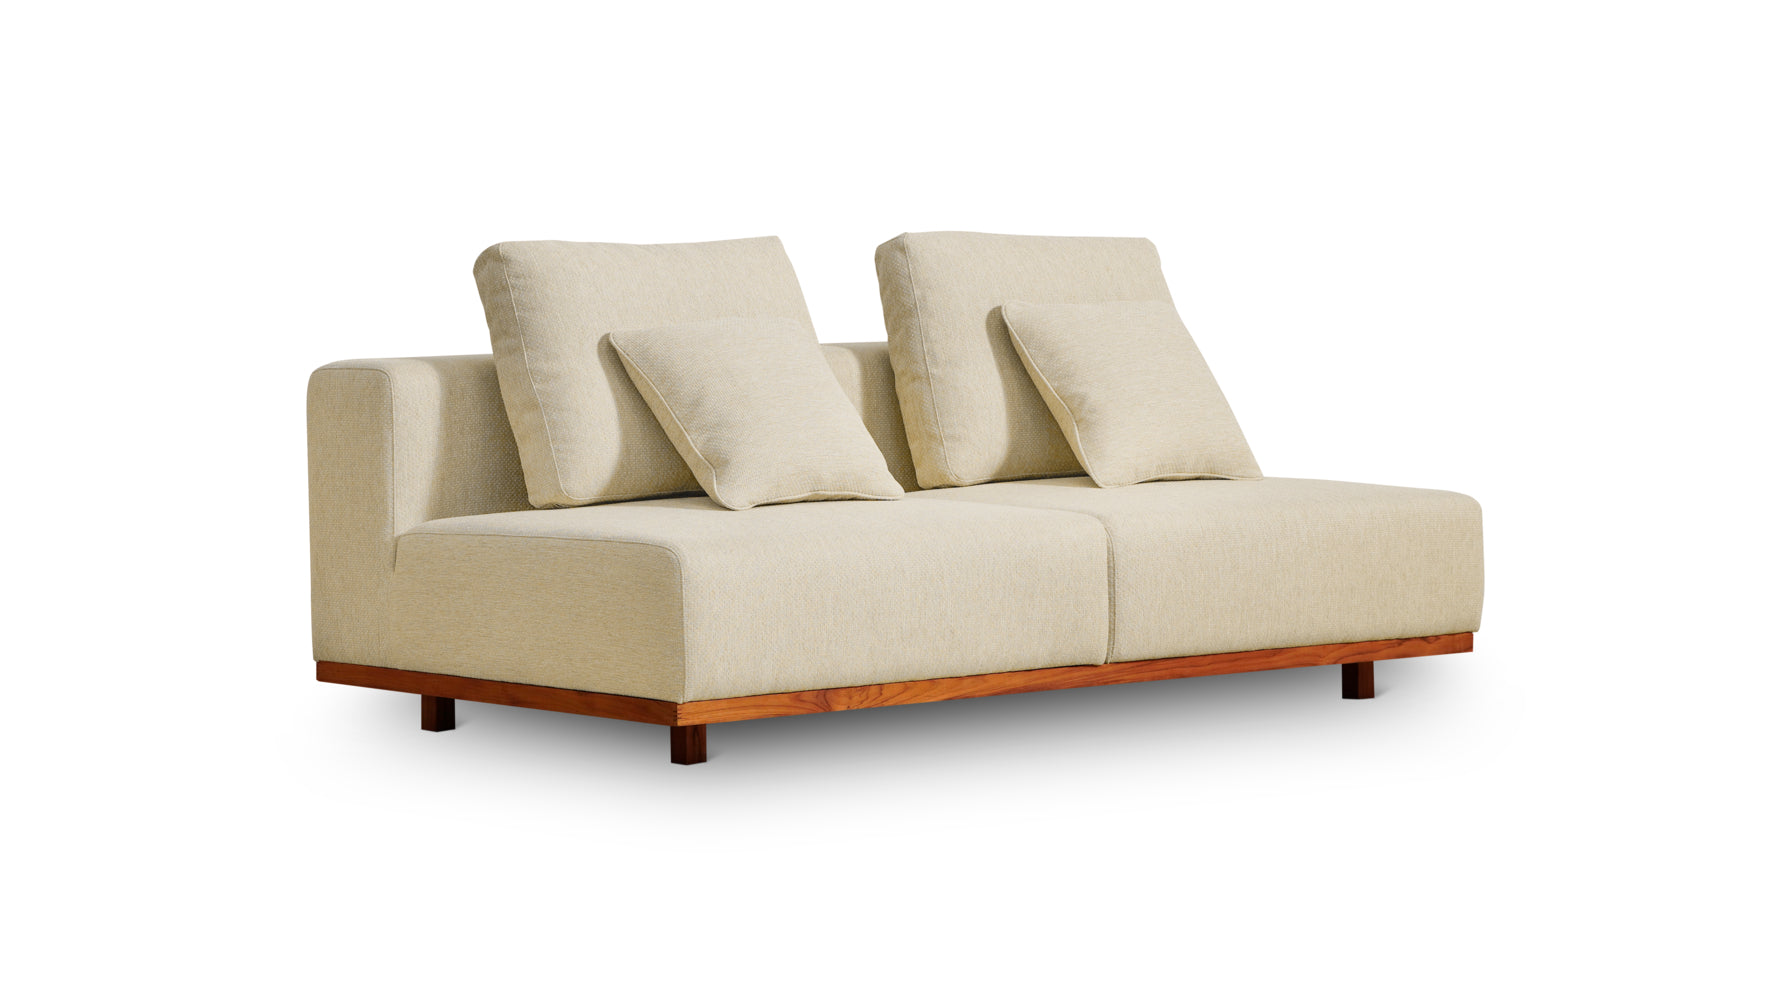 Sunny Days Outdoor Sofa, 2 Seater, Sandy - Image 2